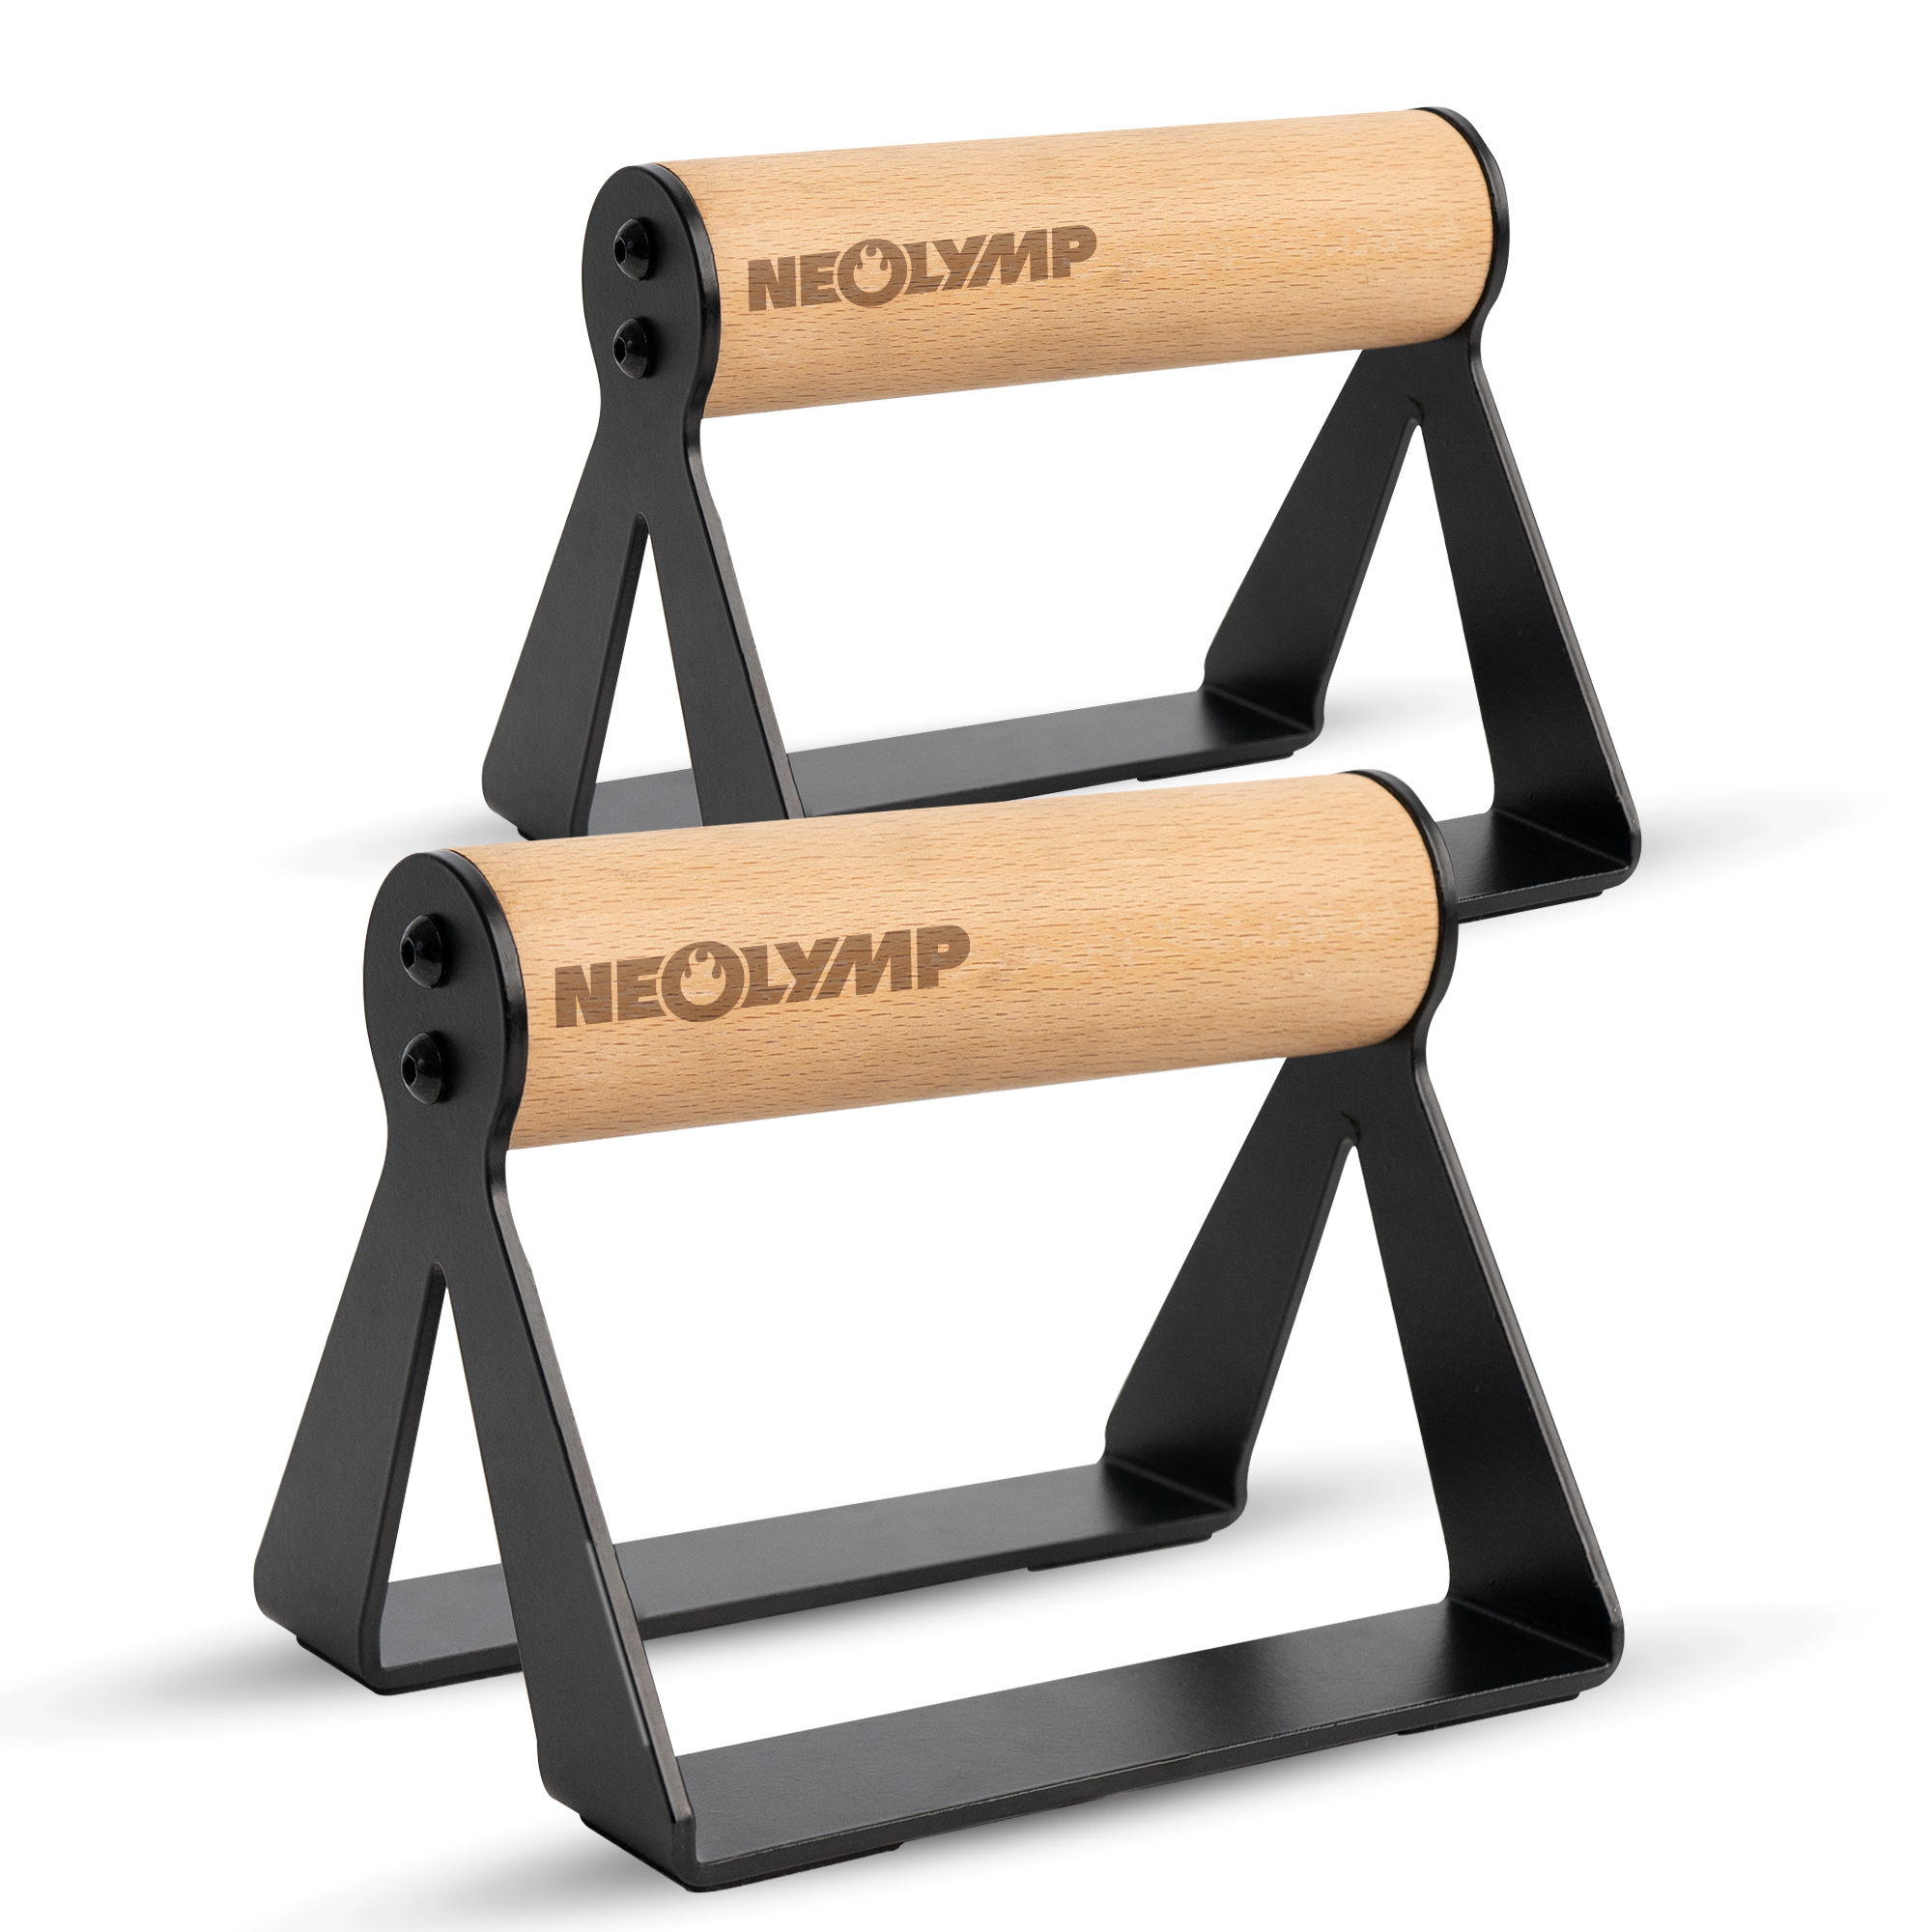 Set of 2 push-up handles with wooden handle